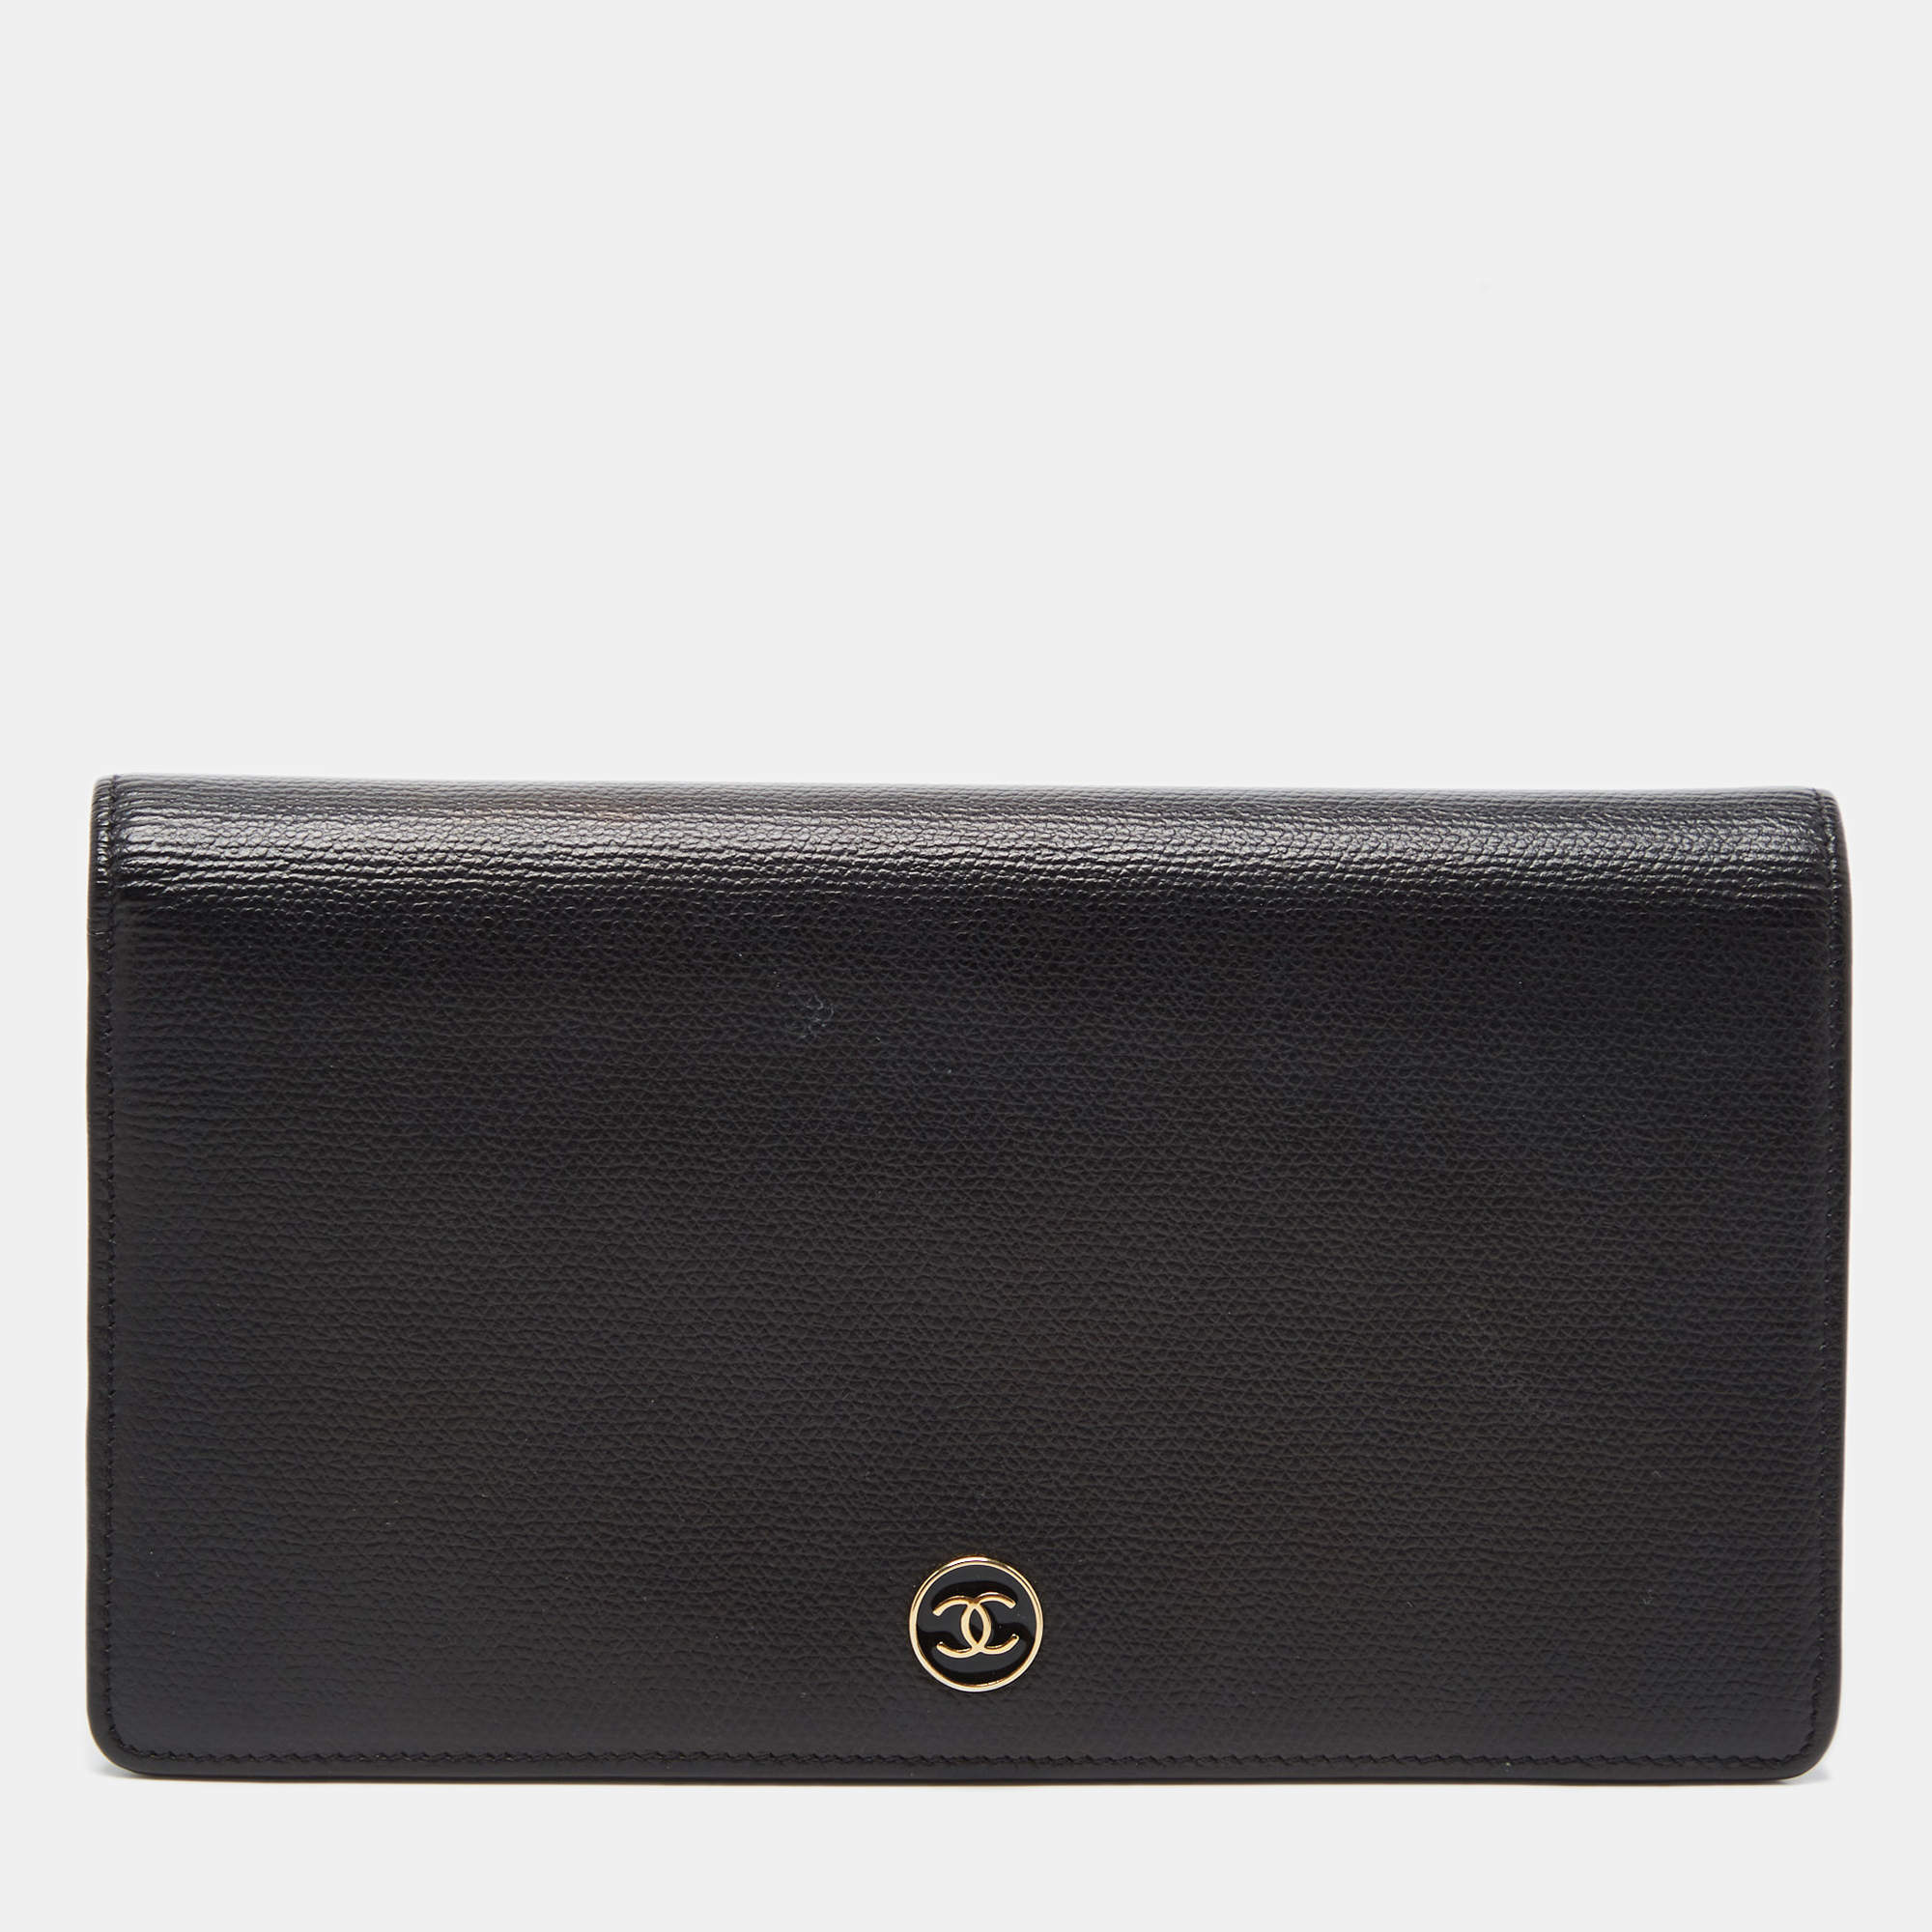 Chanel Black Leather Long CC Continental Wallet